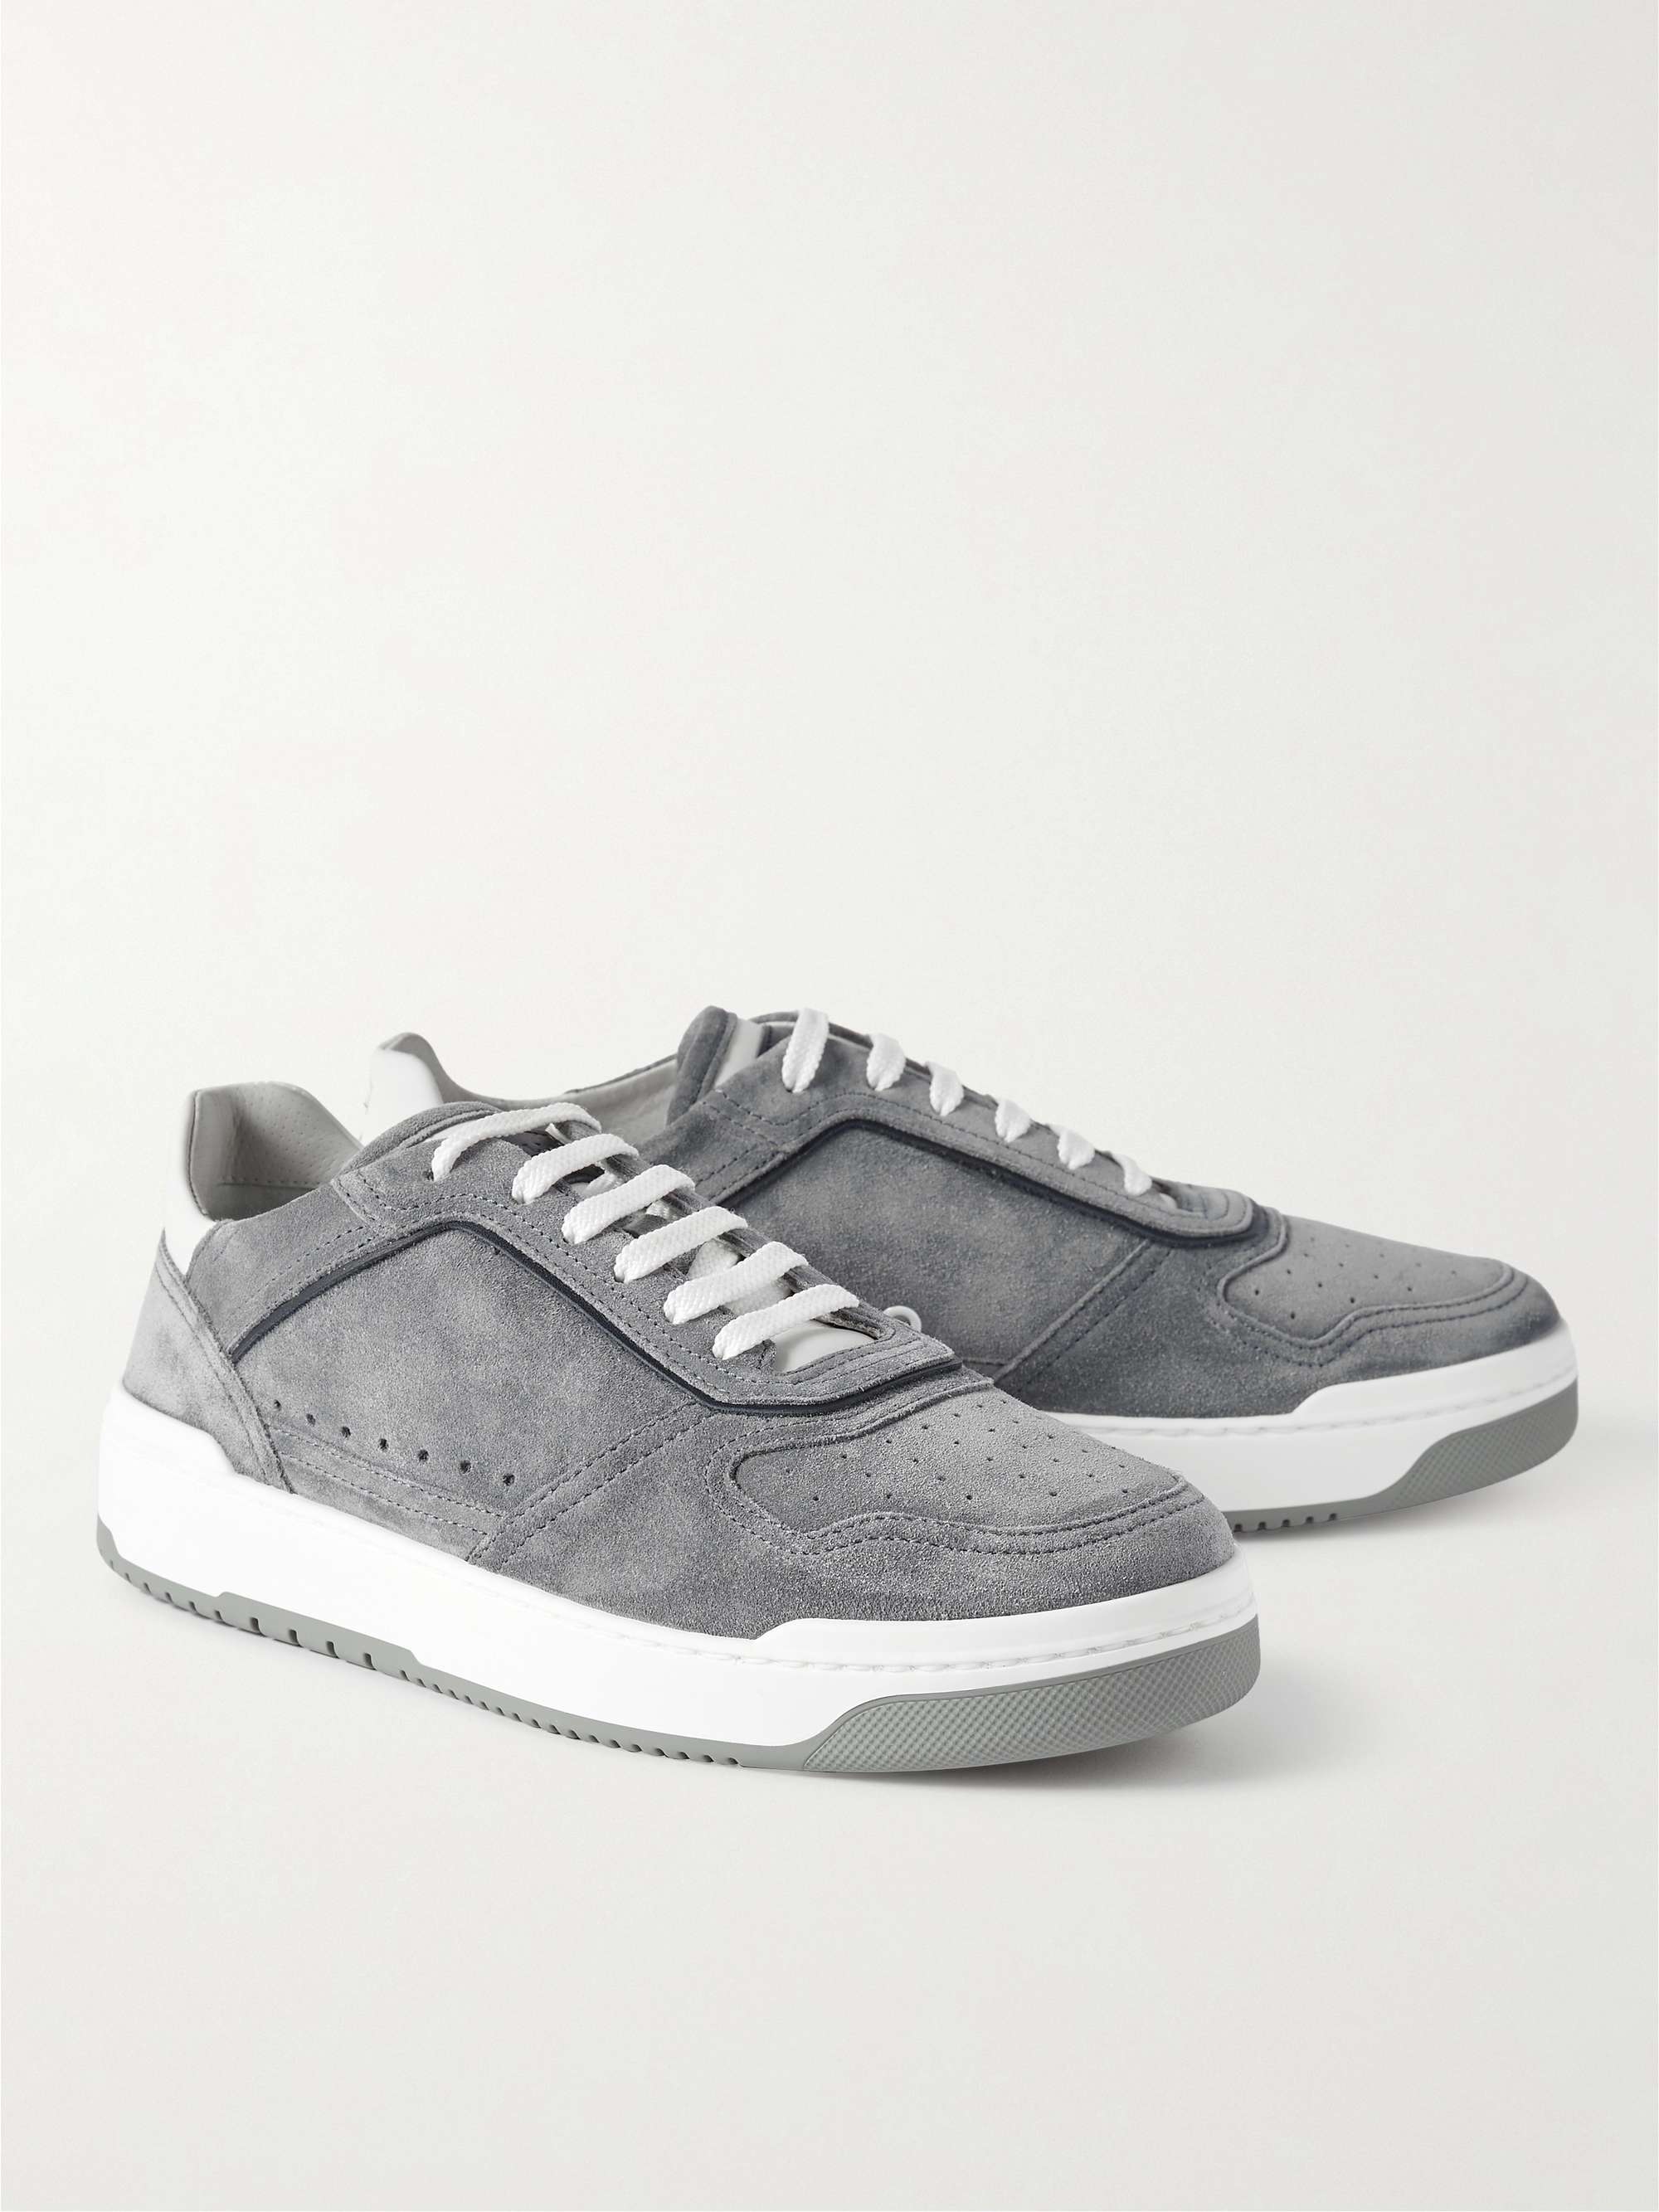 BRUNELLO CUCINELLI Suede-Trimmed Leather Sneakers